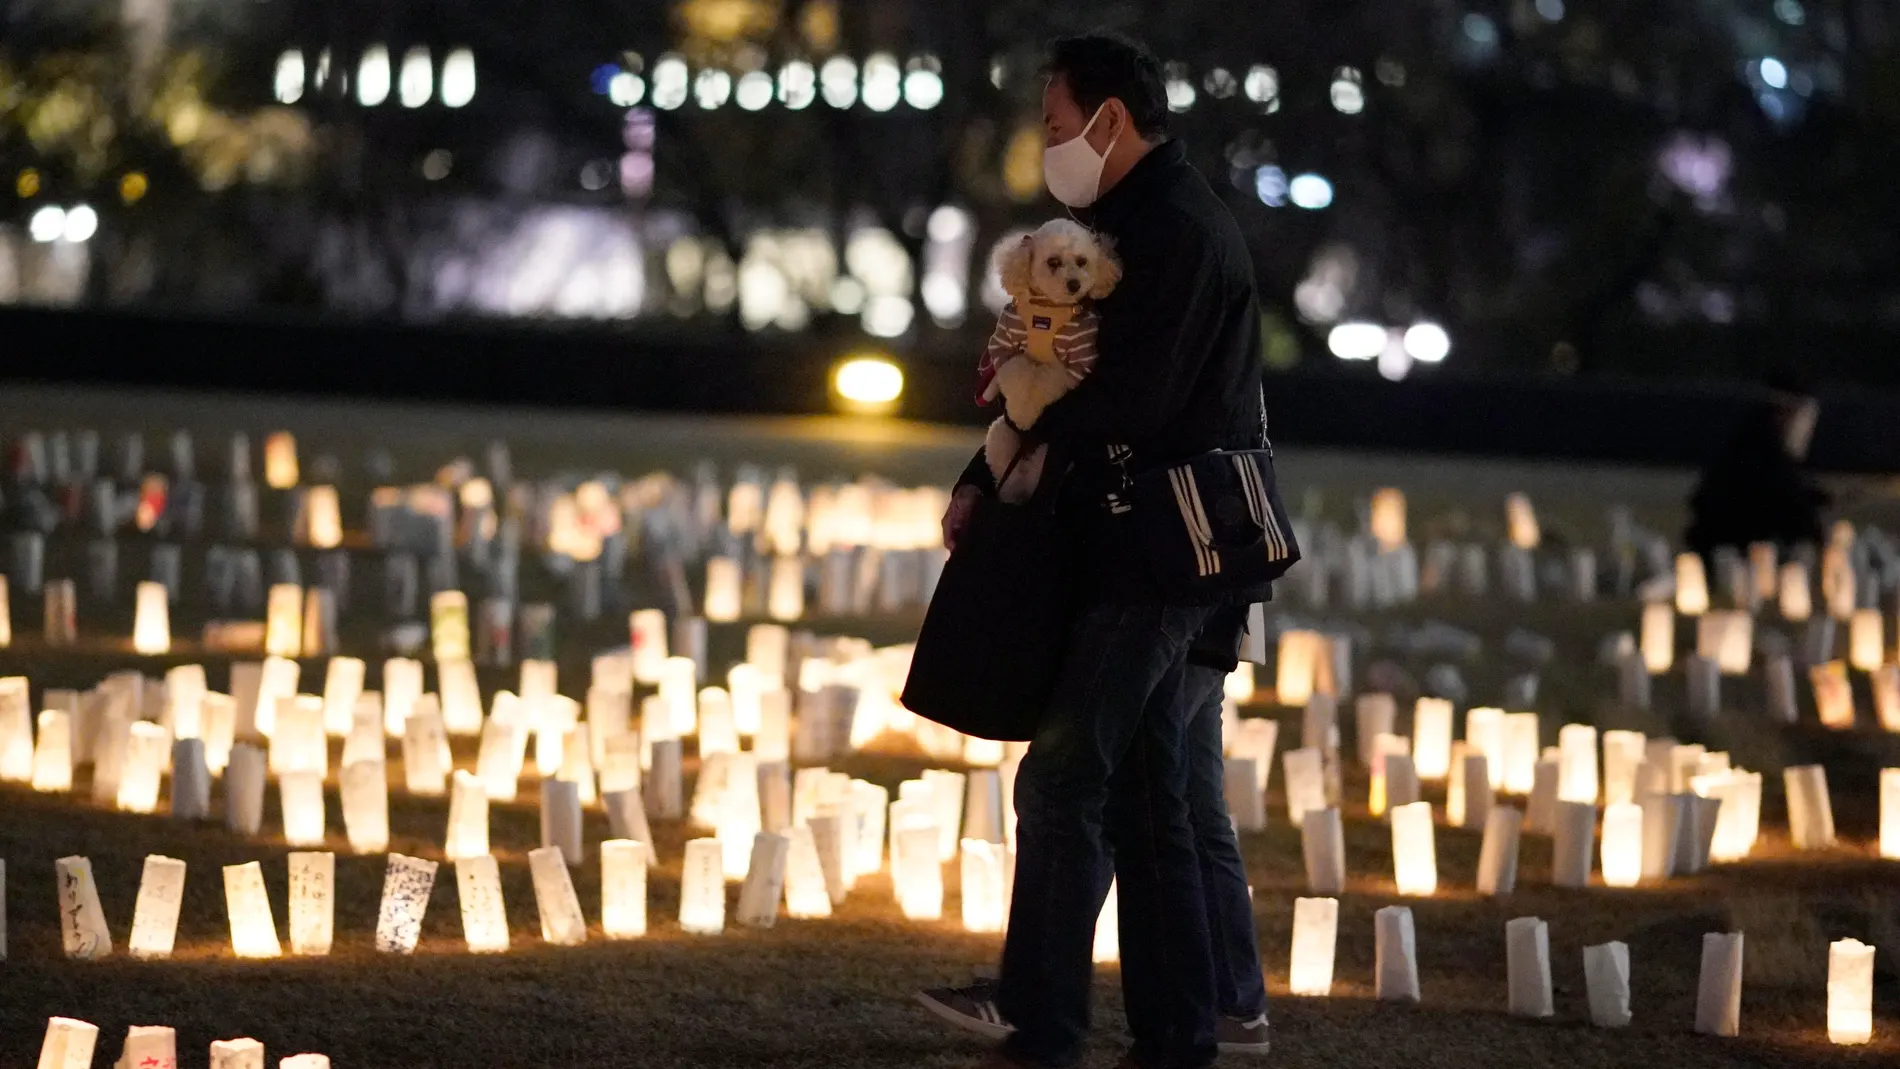 Tokyo (Japan), 10/03/2021.- A visitor walks through paper lanterns lit for the victims of the 2011 Great East Japan Earthquake in Tokyo, Japan, 10 March 2021, on the eve of the 10th anniversary of the devastating earthquake and tsunami. More than 2000 candles with messages are displayed until 11 March 2021 to mark the 10th anniversary of the Great East Japan Earthquake. (Terremoto/sismo, Japón, Tokio) EFE/EPA/FRANCK ROBICHON